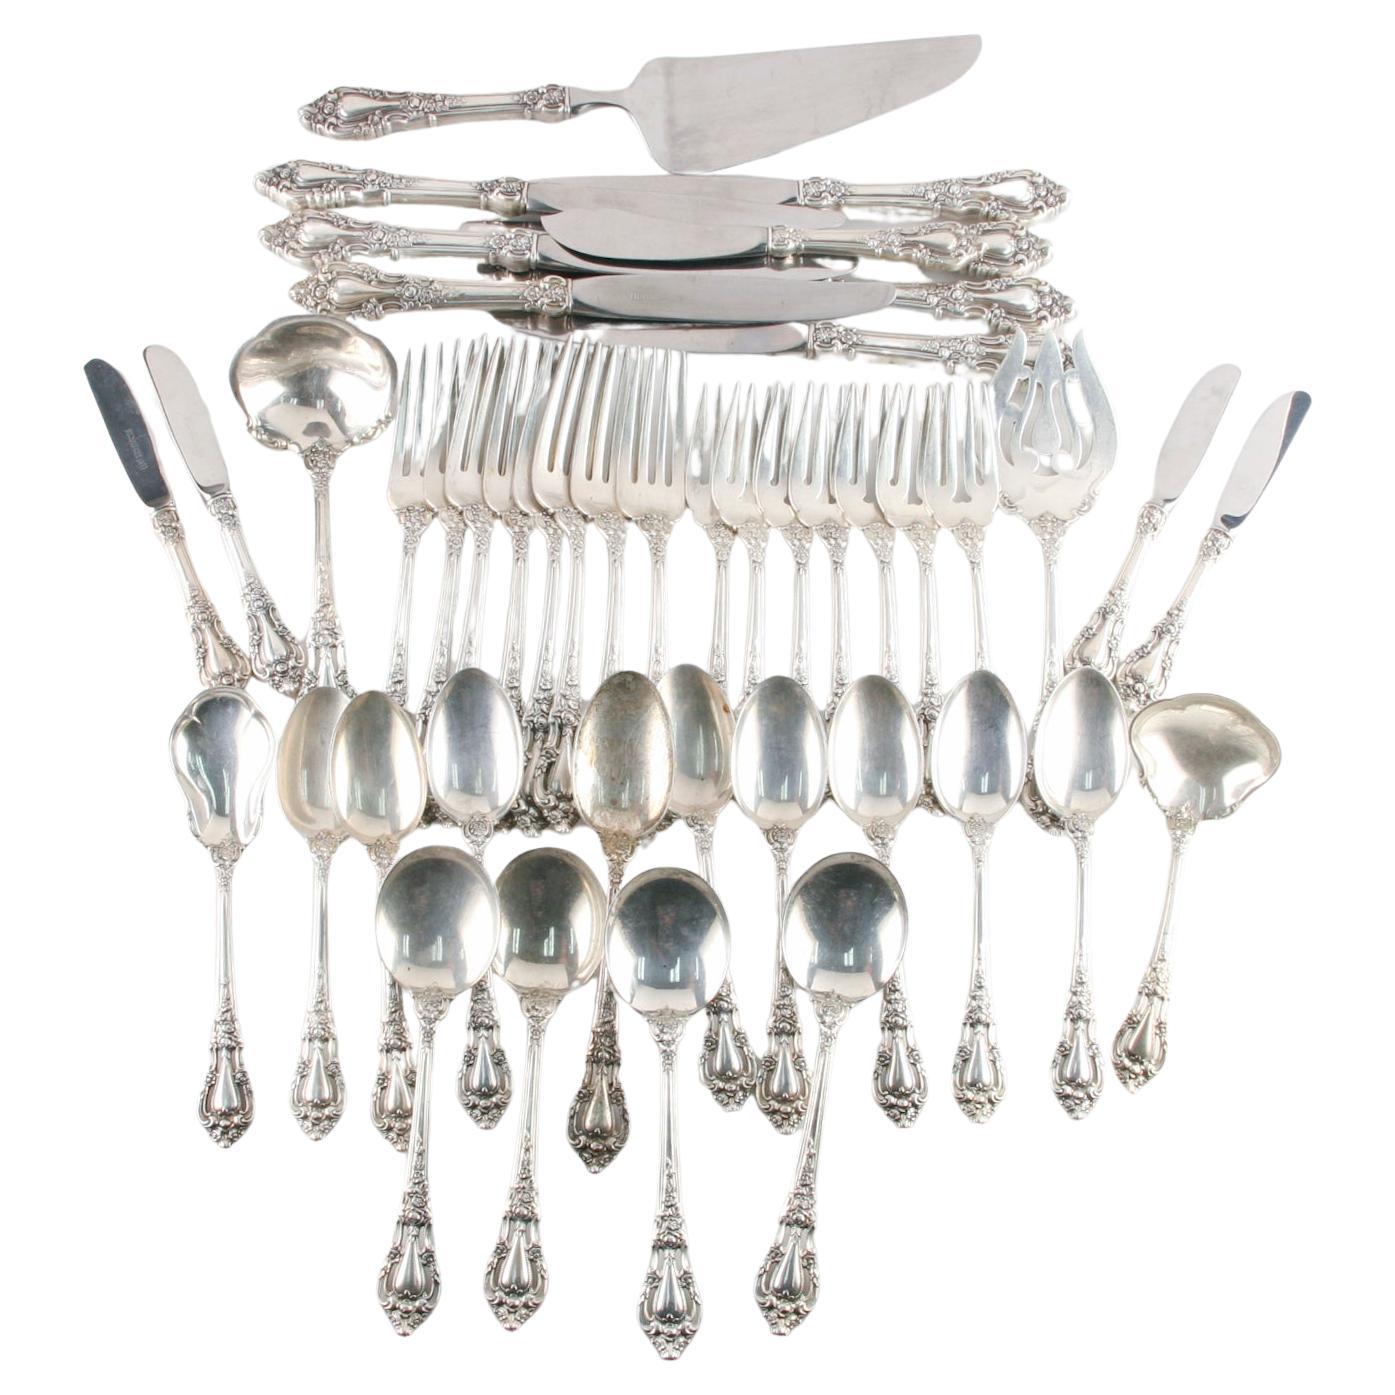  Eloquence by Lunt Sterling Silver Flatware Set 45 Pieces Great Condition!